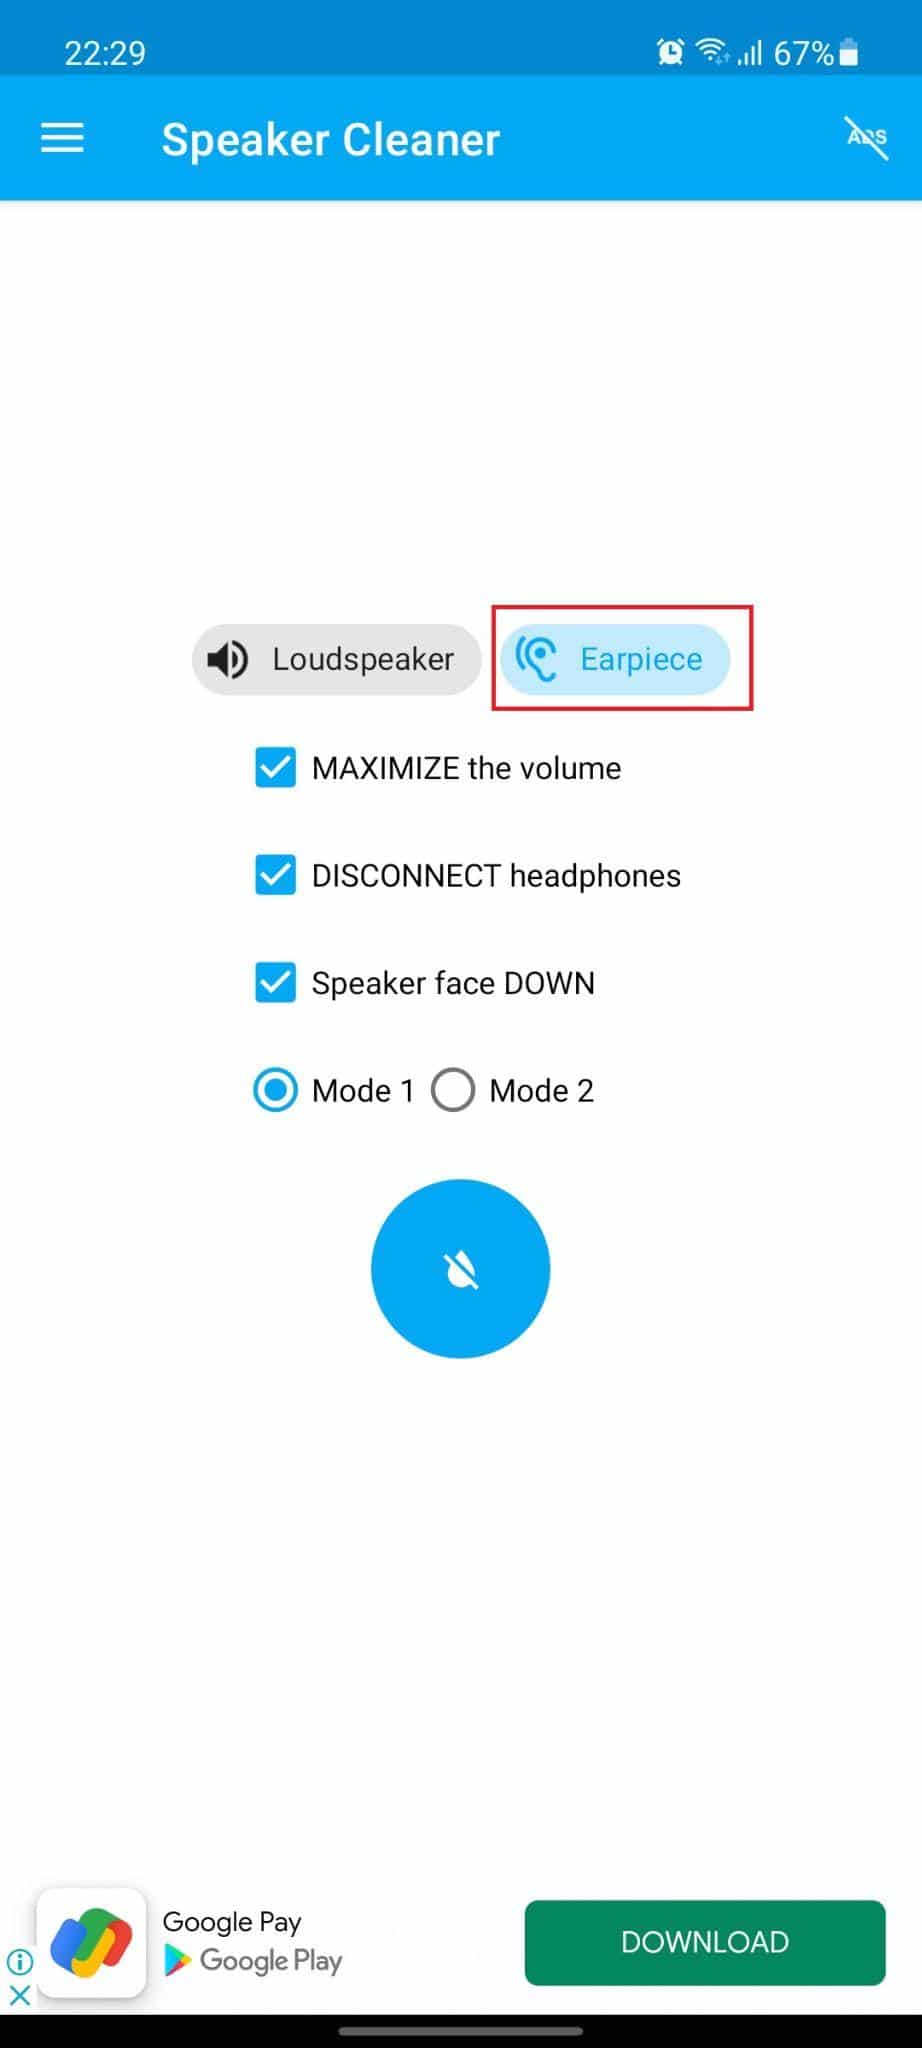 Super speaker cleaner app. Earpiece mode is highlighted. How to Fix Phone Speaker Water Damage